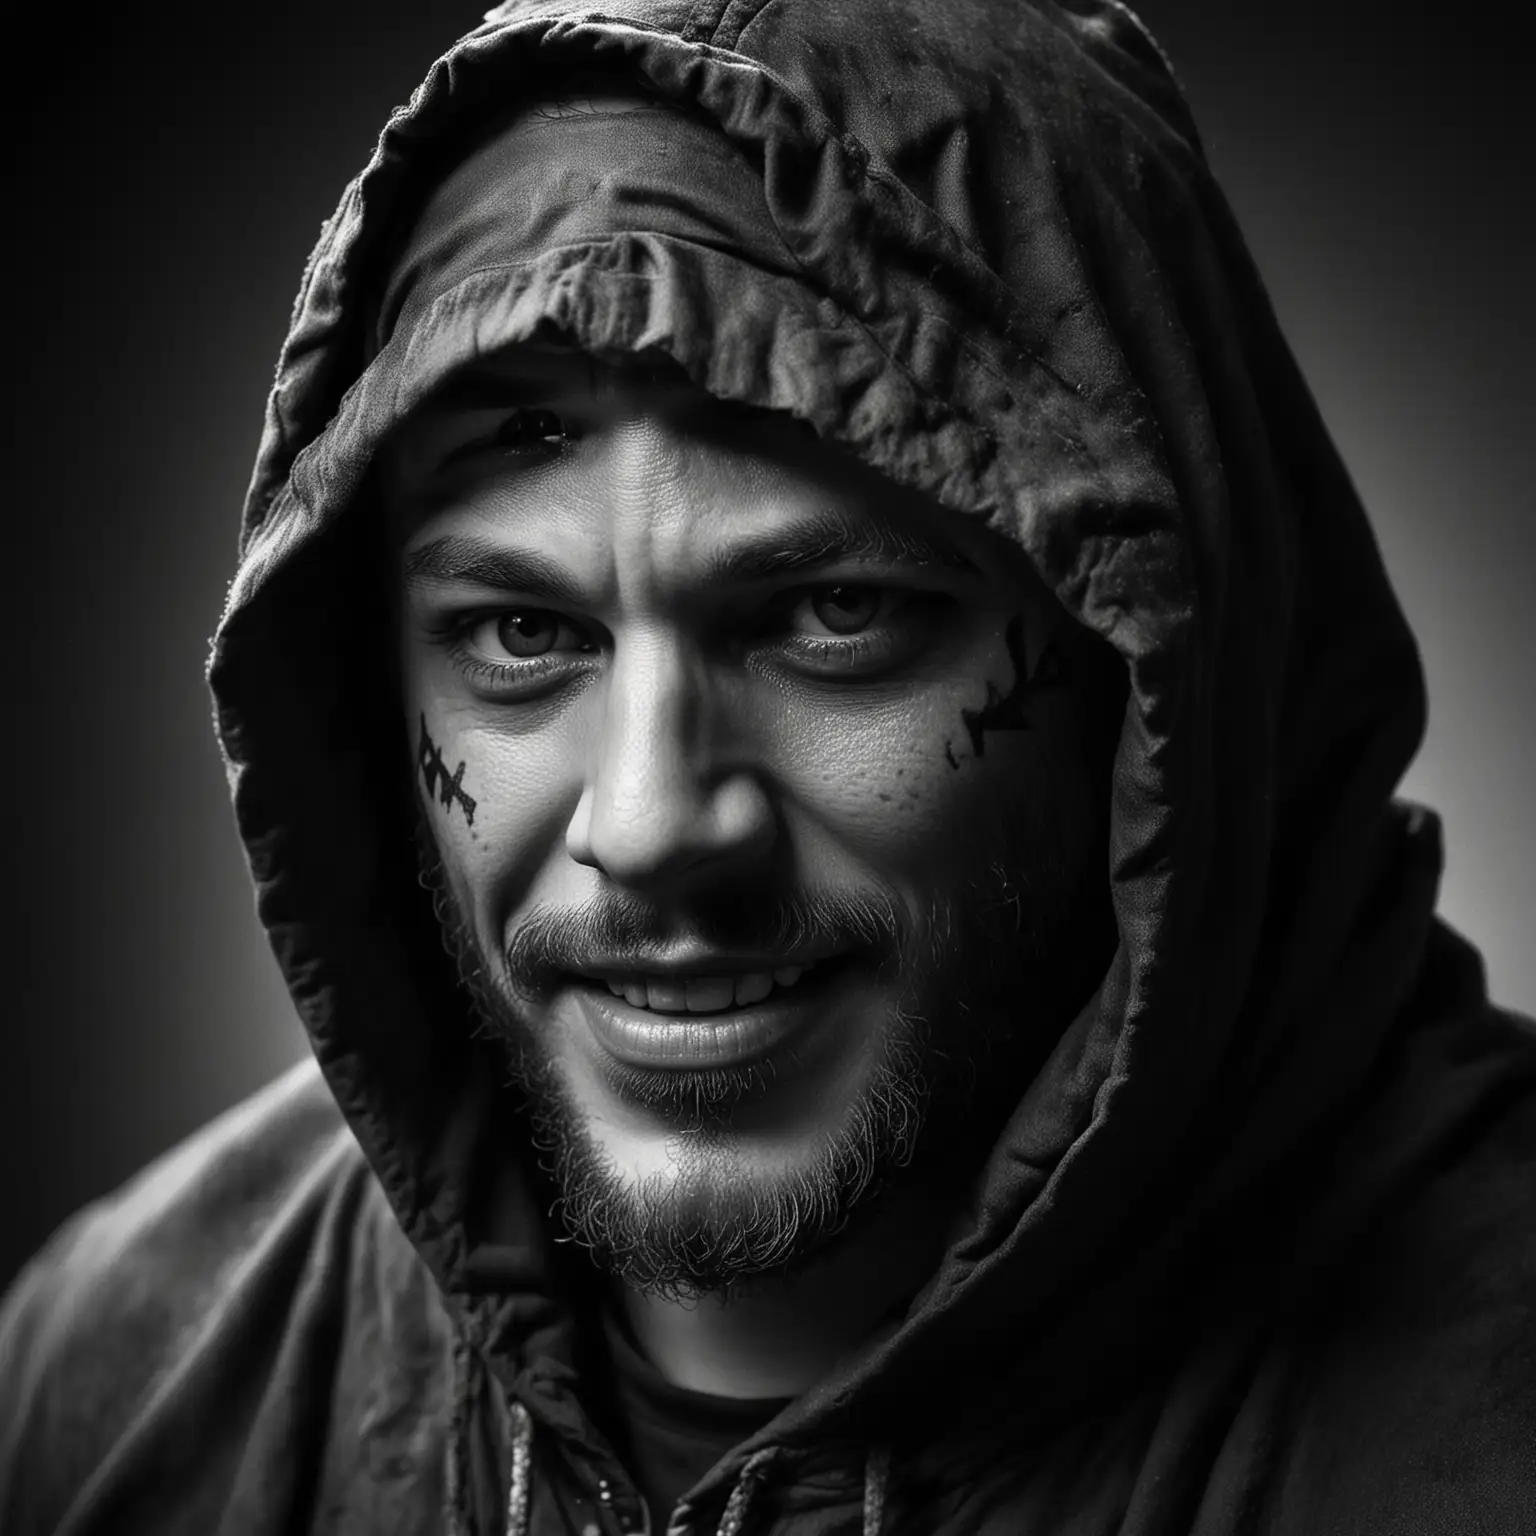 black and grey tattoo design of Tom Hardy face wearing hooded cloak, face is half shrouded in darkness, in black and white on white background, handsome Tom Hardy smile visible